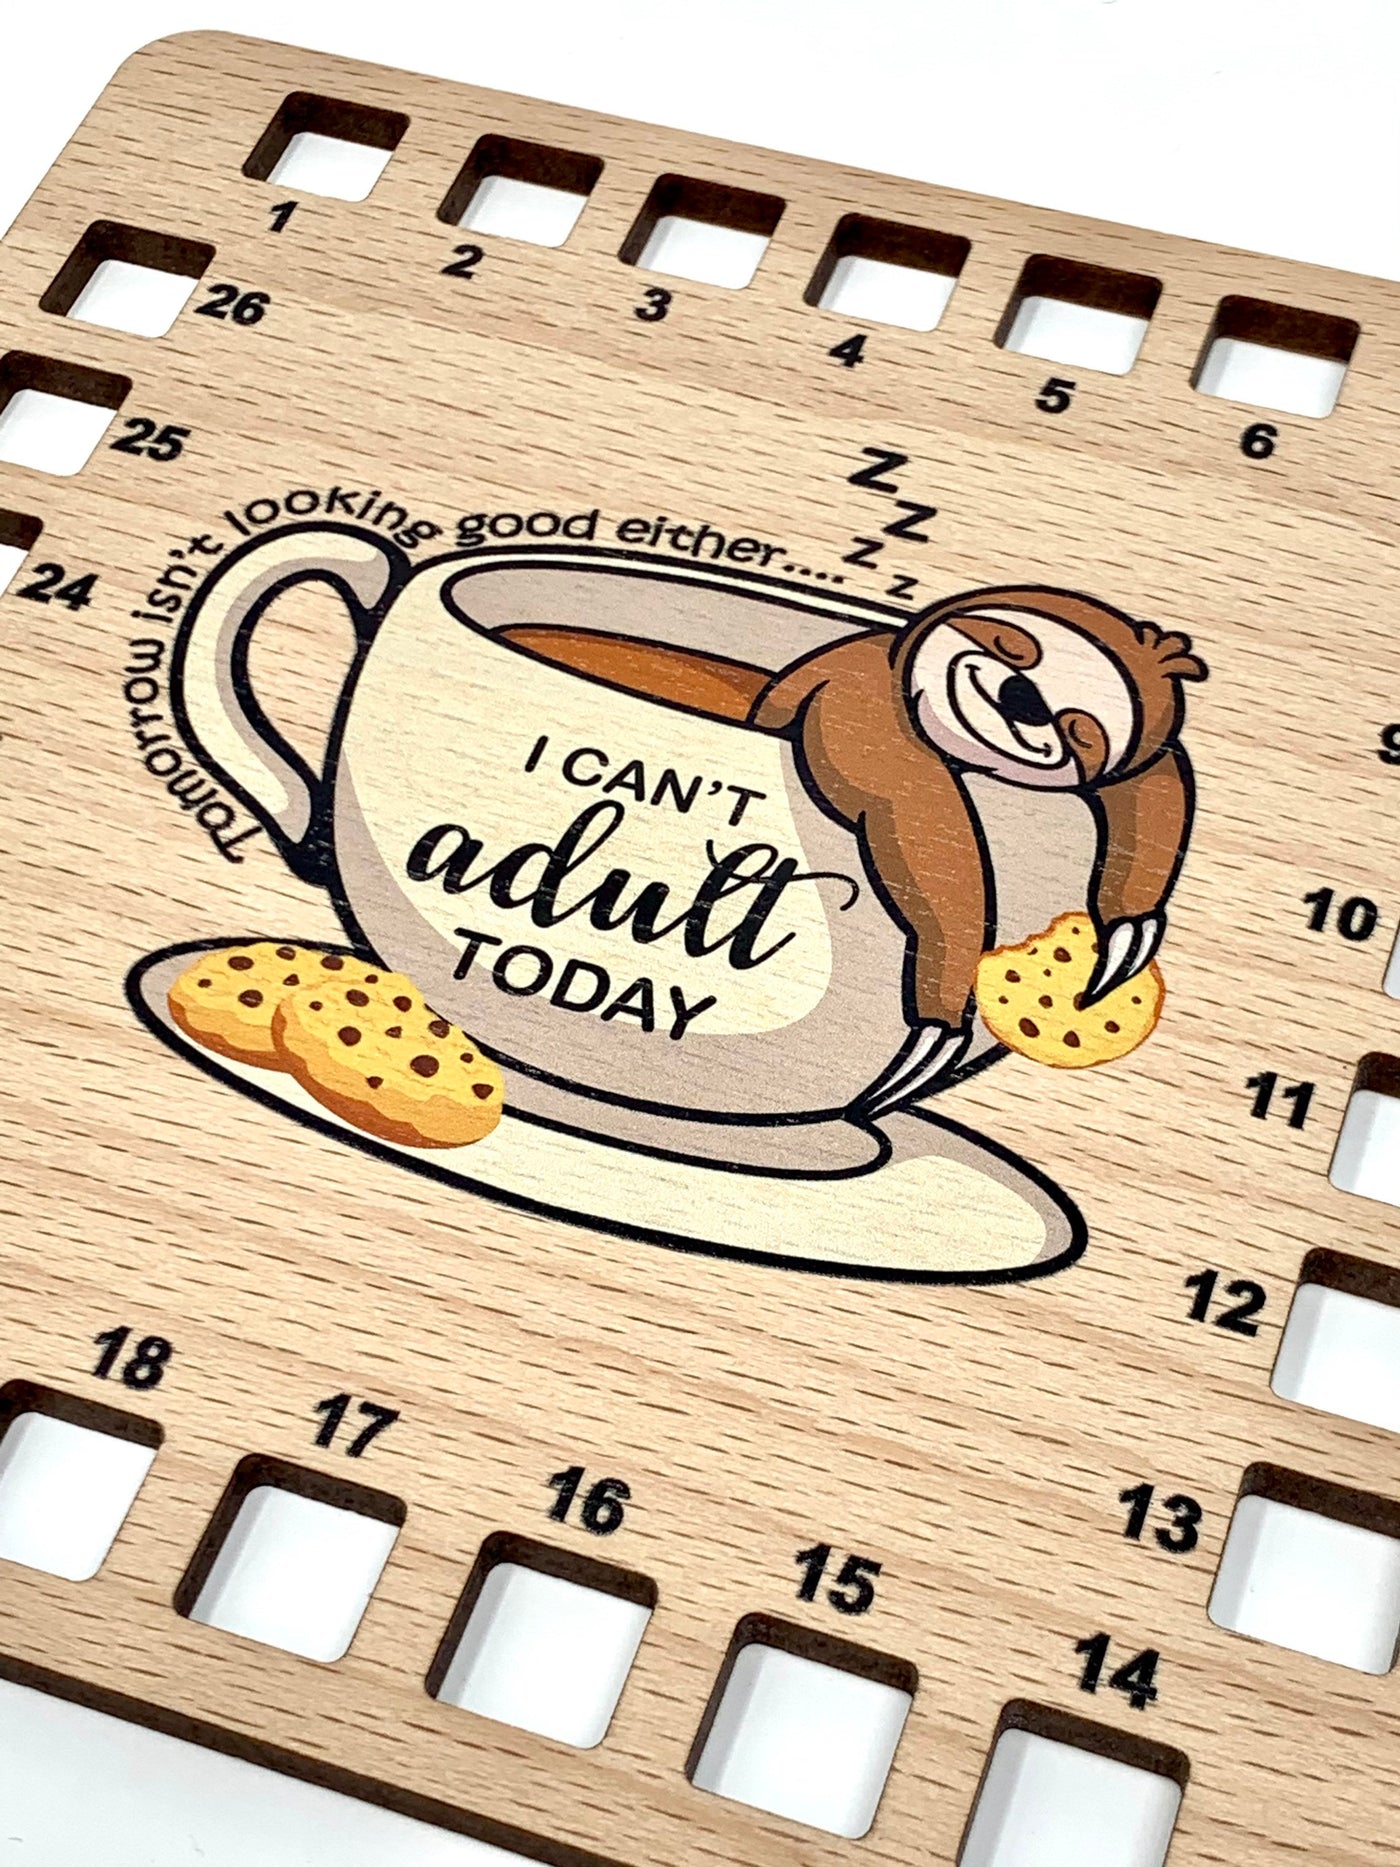 Sloth Can’t Adult Today thread holder floss holder cross stitch organisation